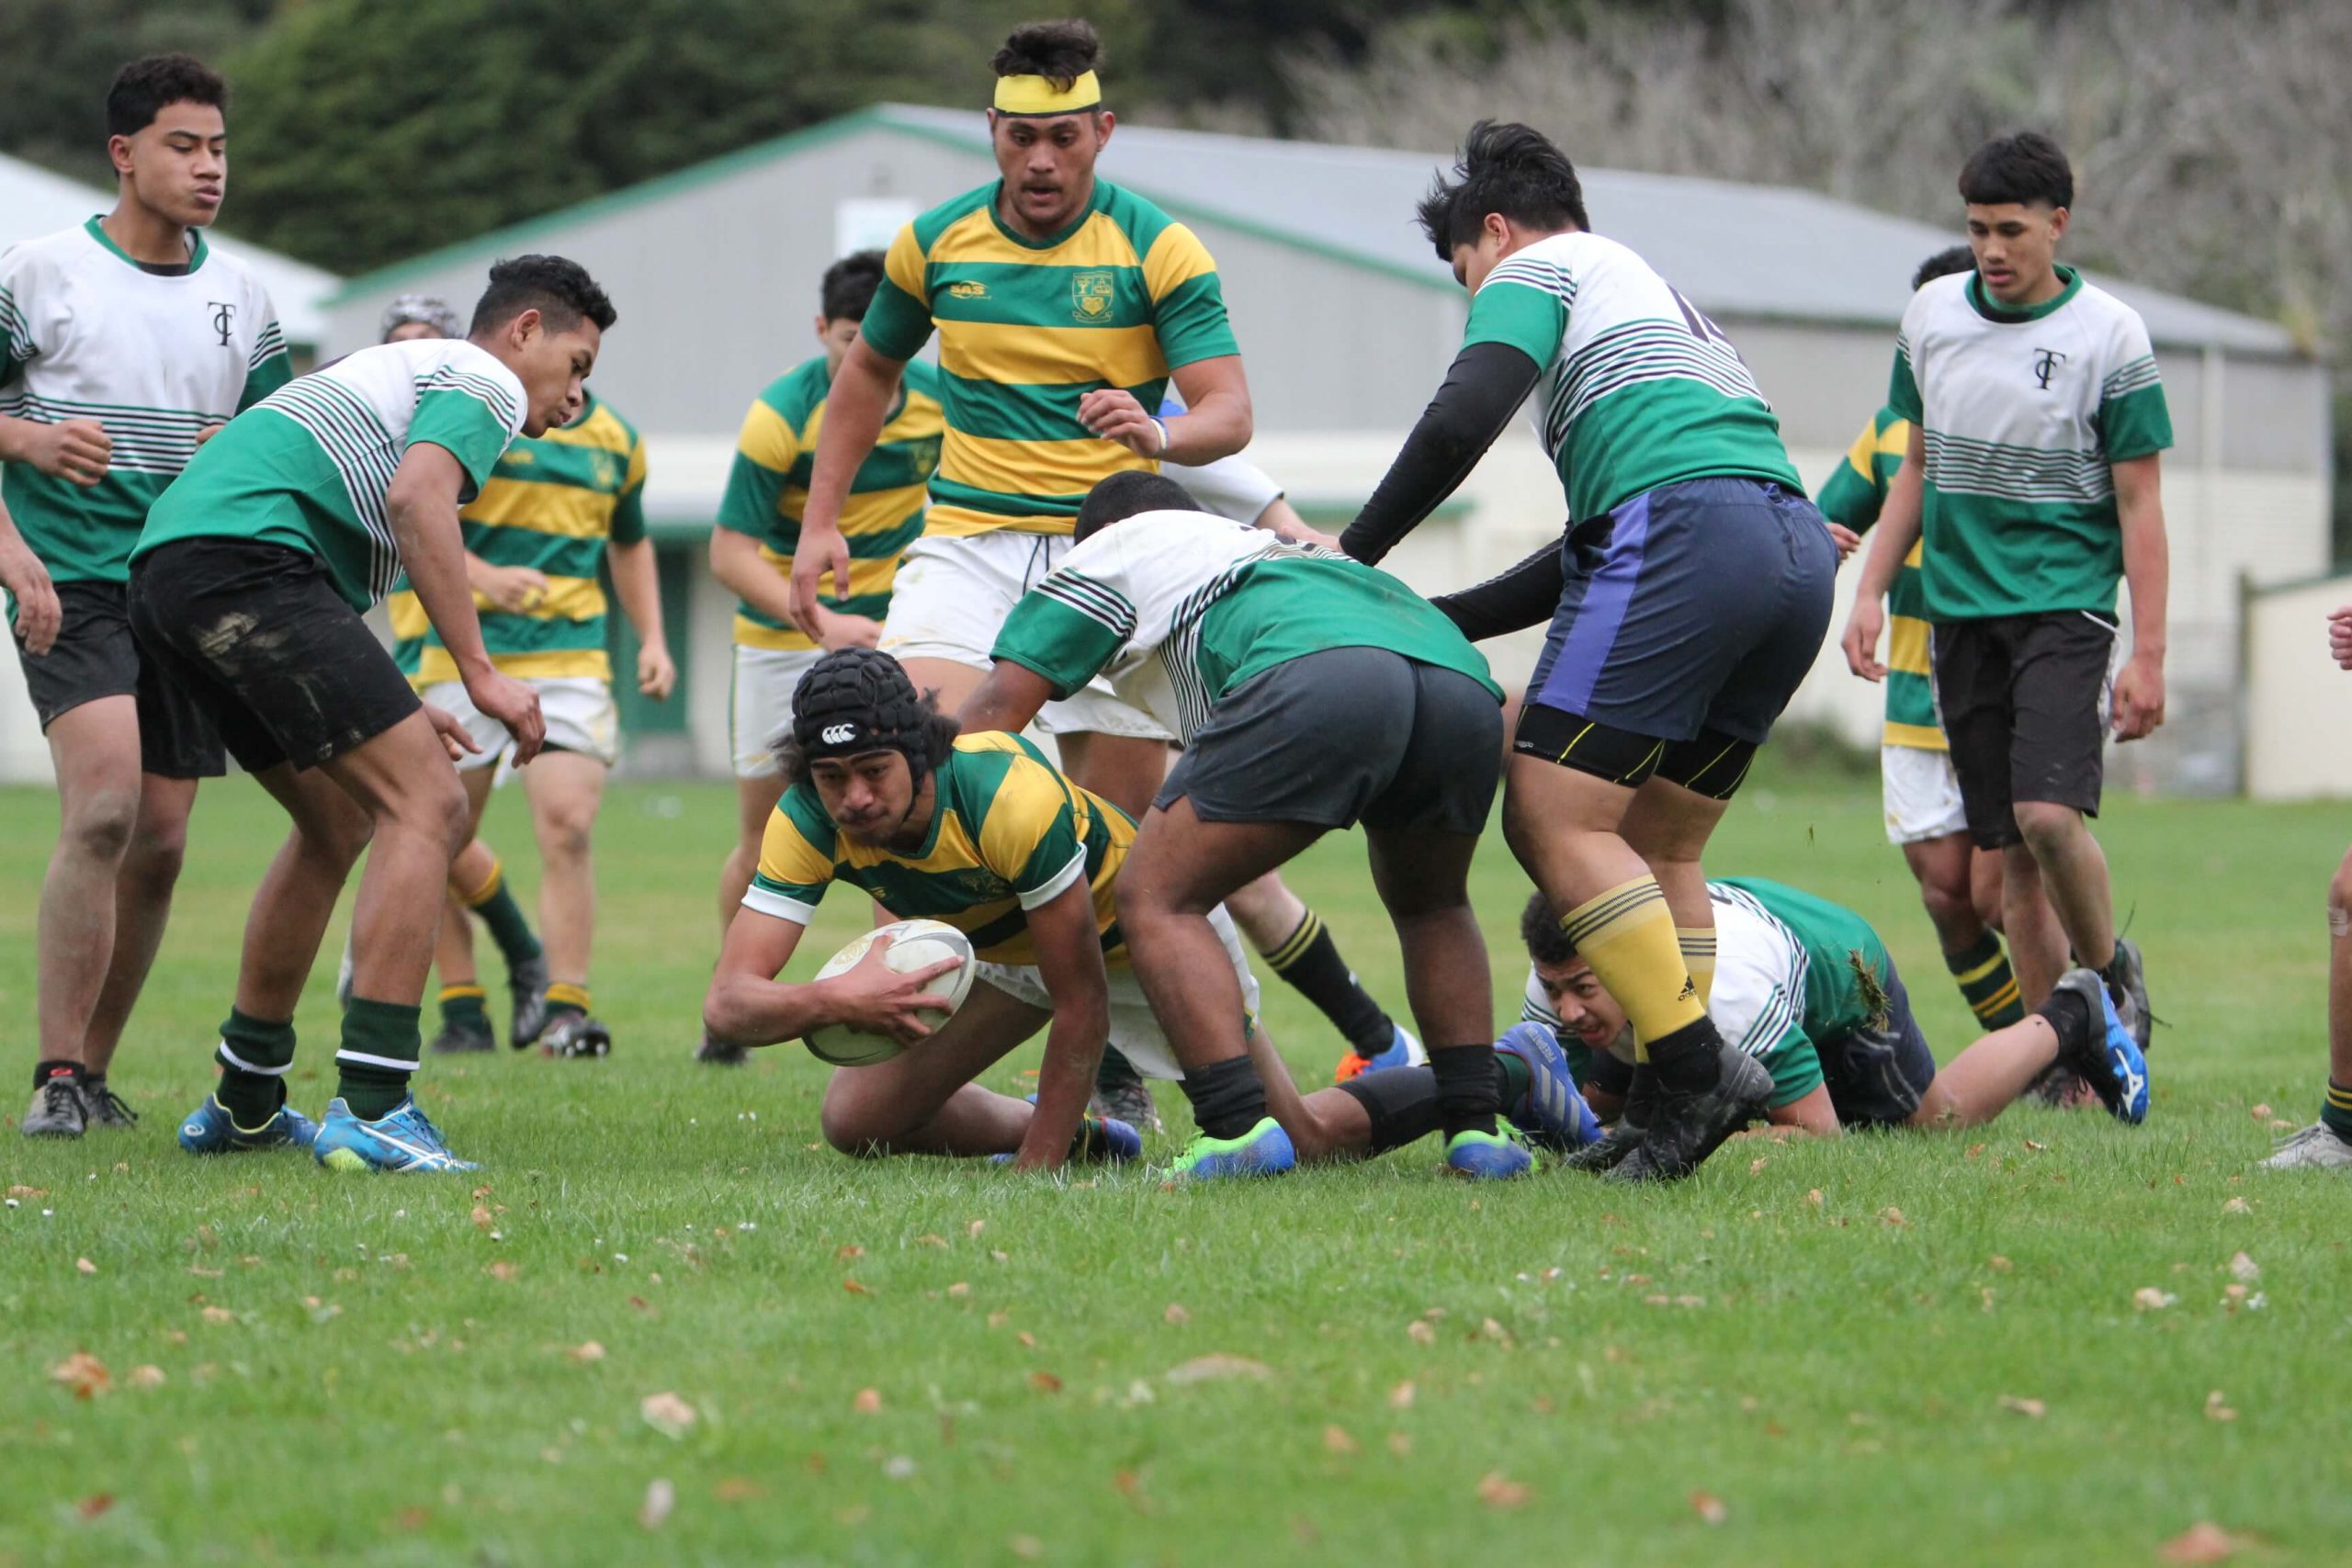 Mana College Rugby team playing a mathc